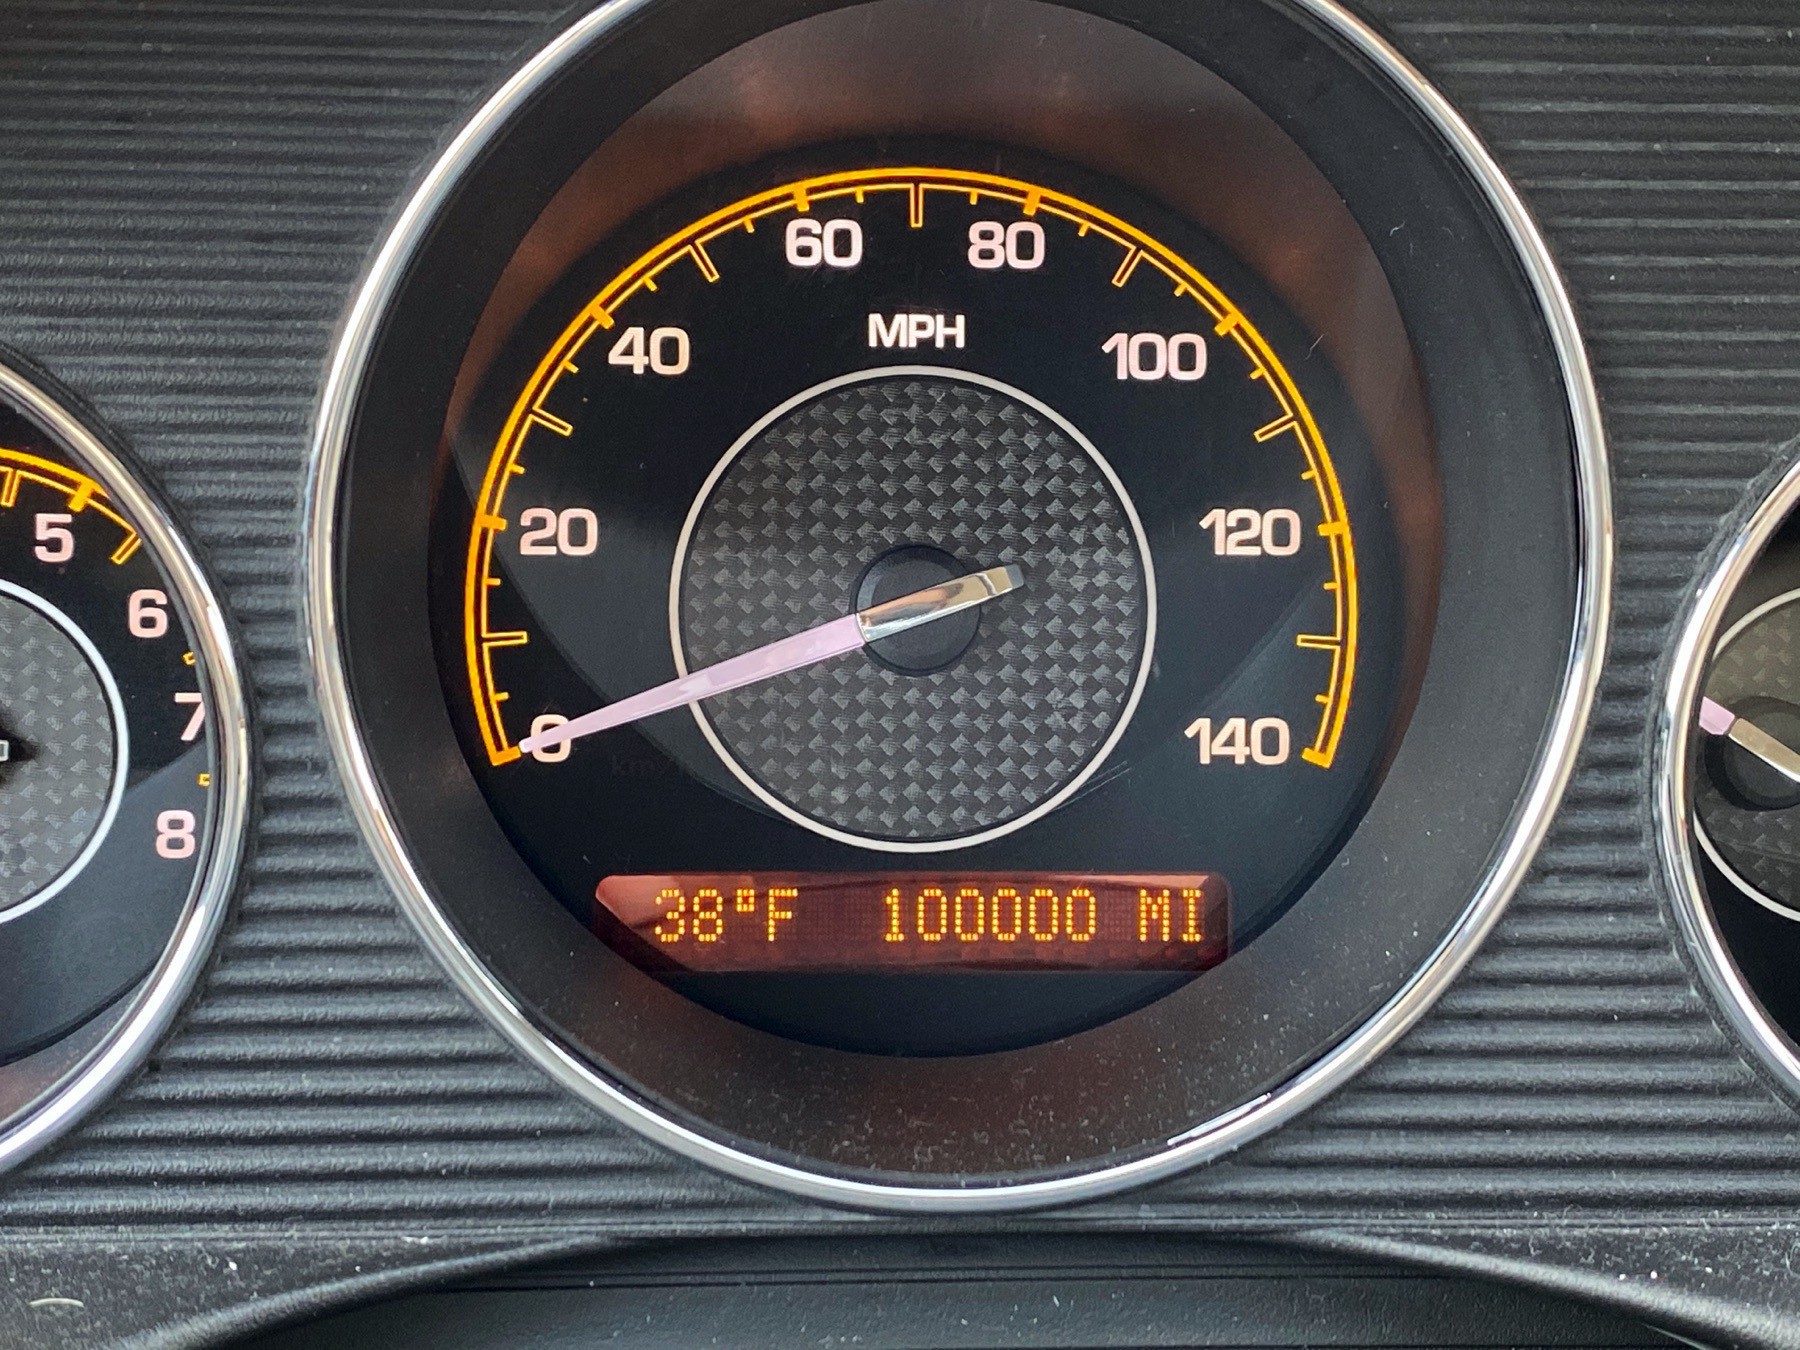 Car Odometer showing 100,000 miles